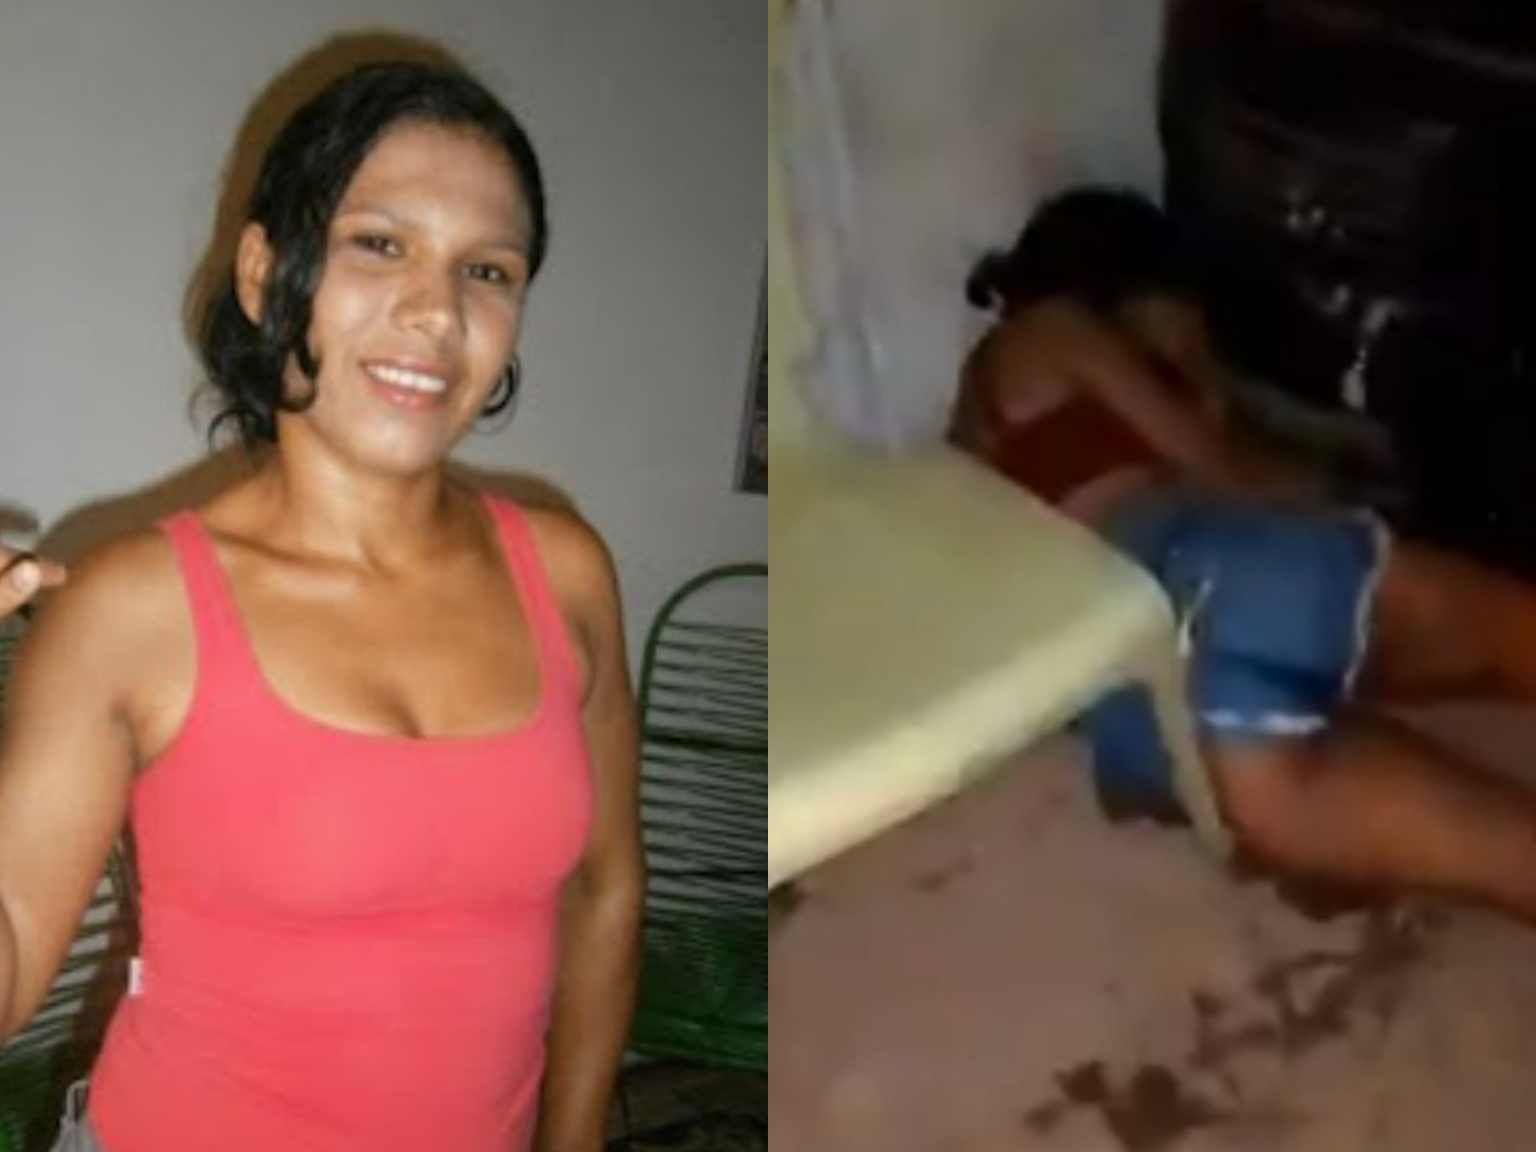 34-Year-Old Woman Gets Found Killed in Brazil